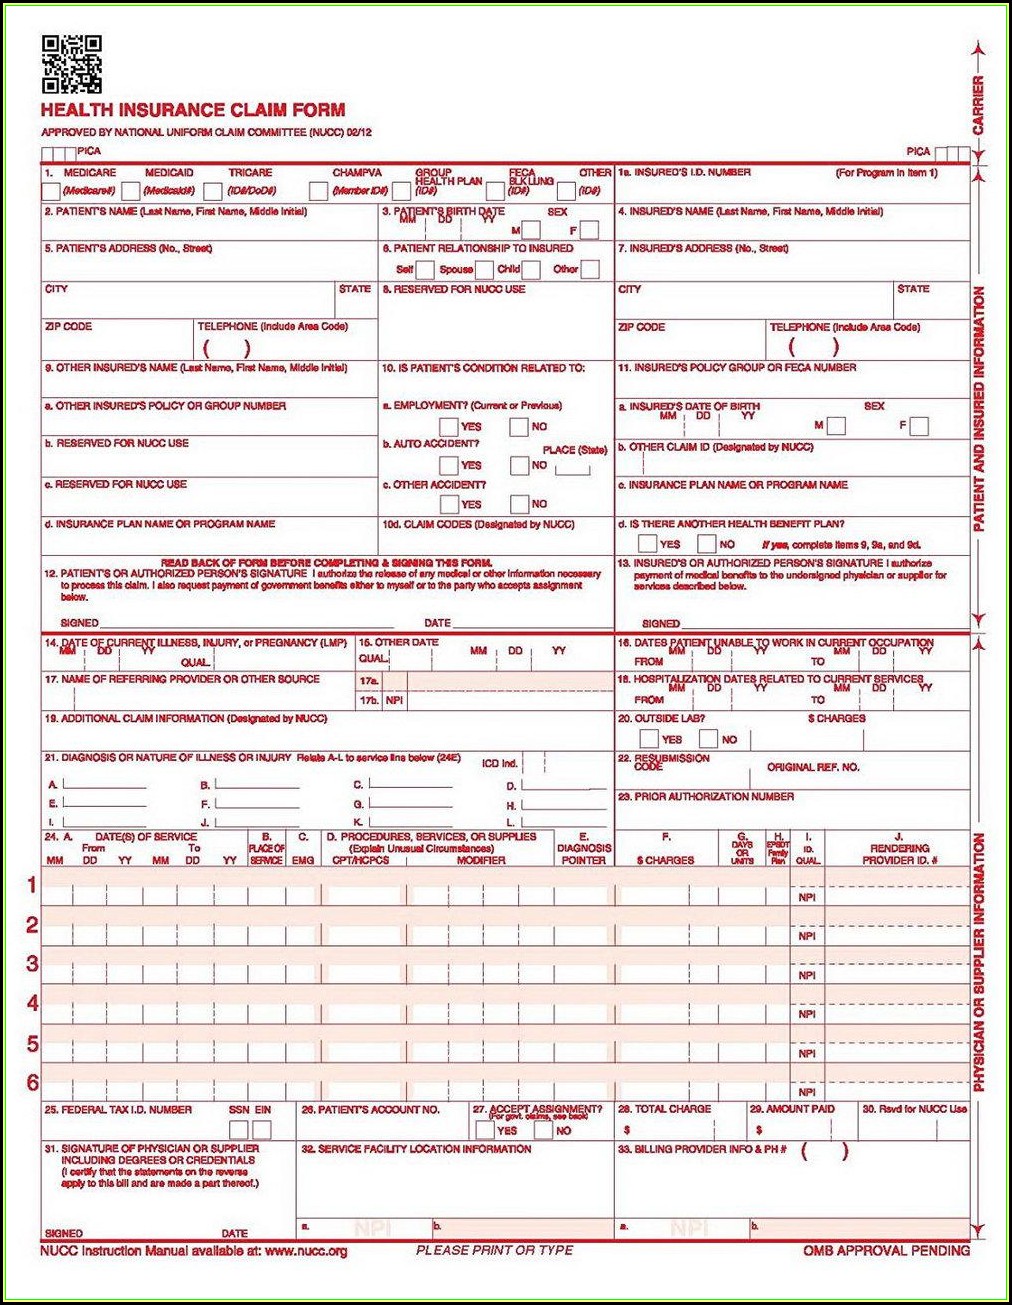 Cms 1500 Form Fillable Free Online Printable Forms Free Online